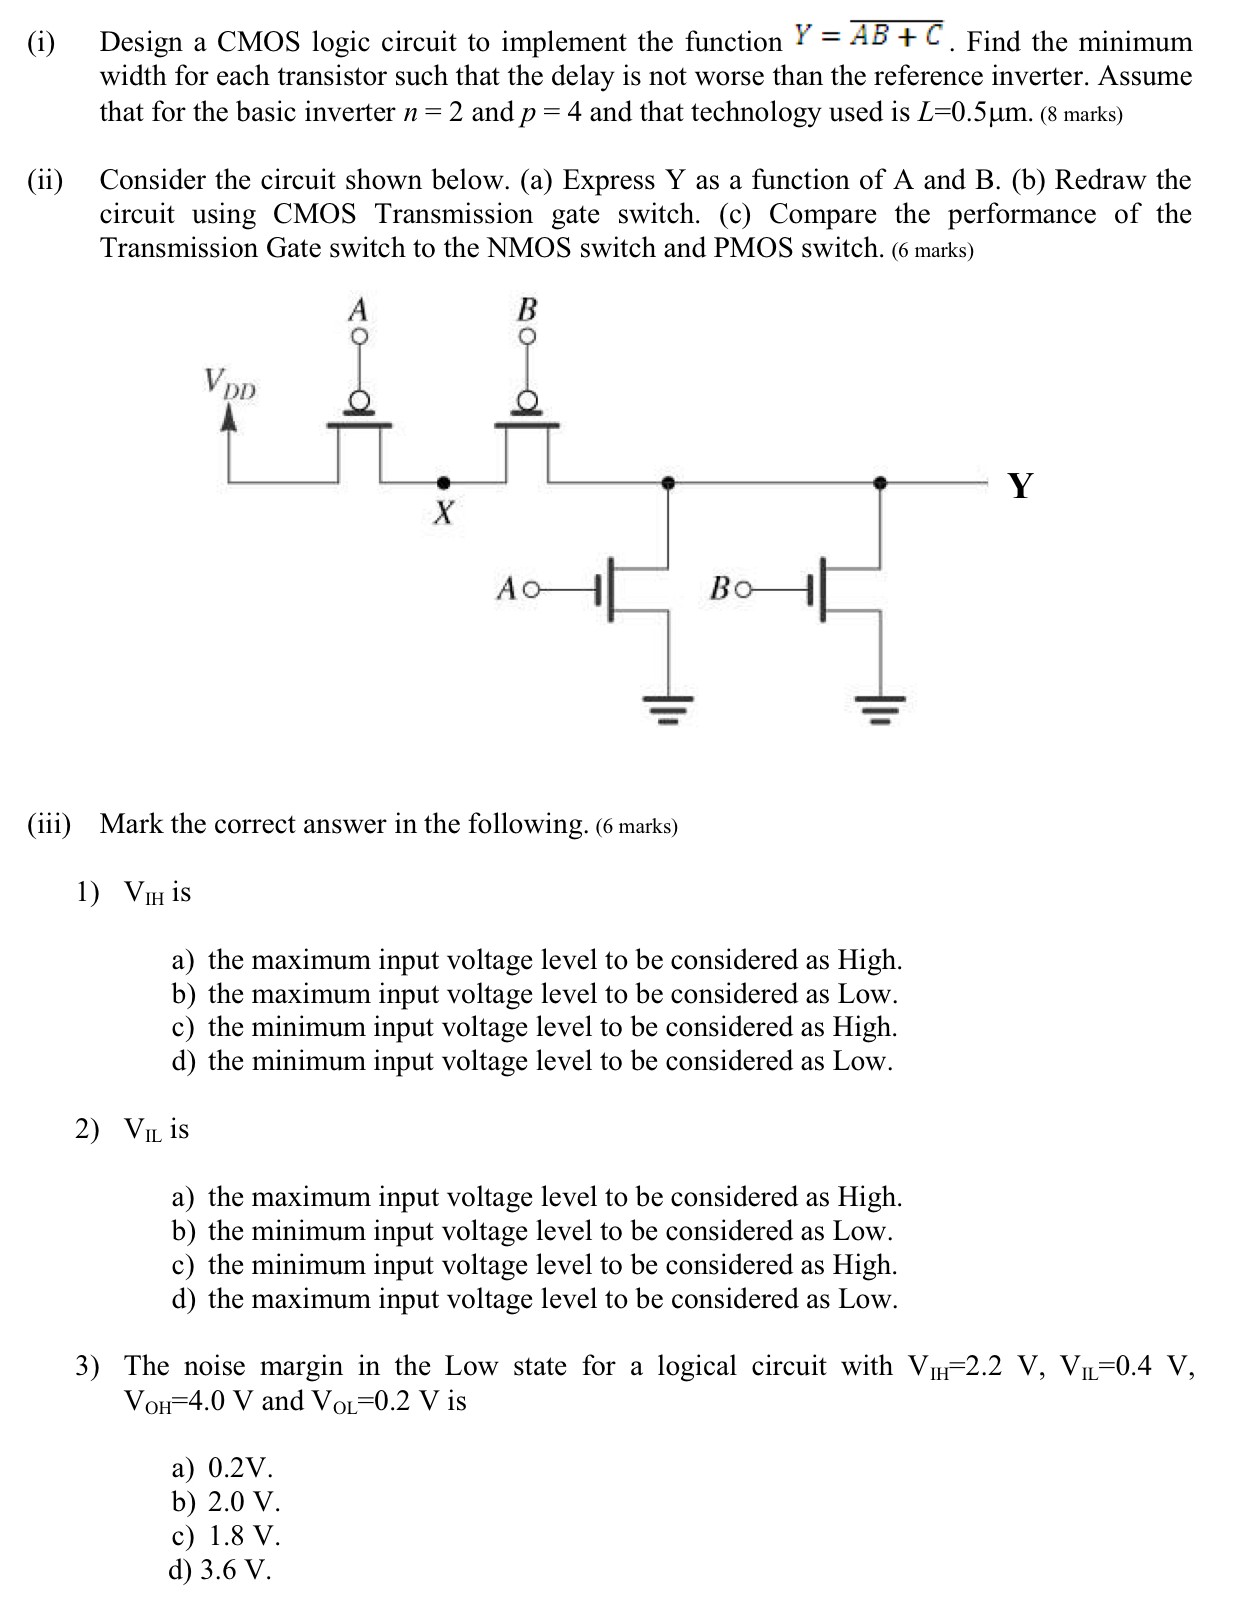 (i) Design a CMOS logic circuit to implement the function Y = AB + C¯. Find the minimum width for each transistor such that the delay is not worse than the reference inverter. Assume that for the basic inverter n = 2 and p = 4 and that technology used is L = 0.5 μm. ( 8 marks) (ii) Consider the circuit shown below. (a) Express Y as a function of A and B. (b) Redraw the circuit using CMOS Transmission gate switch. (c) Compare the performance of the Transmission Gate switch to the NMOS switch and PMOS switch. (6 marks) (iii) Mark the correct answer in the following. (6 marks)VIH is a) the maximum input voltage level to be considered as High. b) the maximum input voltage level to be considered as Low. c) the minimum input voltage level to be considered as High. d) the minimum input voltage level to be considered as Low. VIL is a) the maximum input voltage level to be considered as High. b) the minimum input voltage level to be considered as Low. c) the minimum input voltage level to be considered as High. d) the maximum input voltage level to be considered as Low. The noise margin in the Low state for a logical circuit with VIH = 2.2 V, VIL = 0.4 V, VOH = 4.0 V and VOL = 0.2 V is a) 0.2 V. b) 2.0 V c) 1.8 V. d) 3.6 V. 